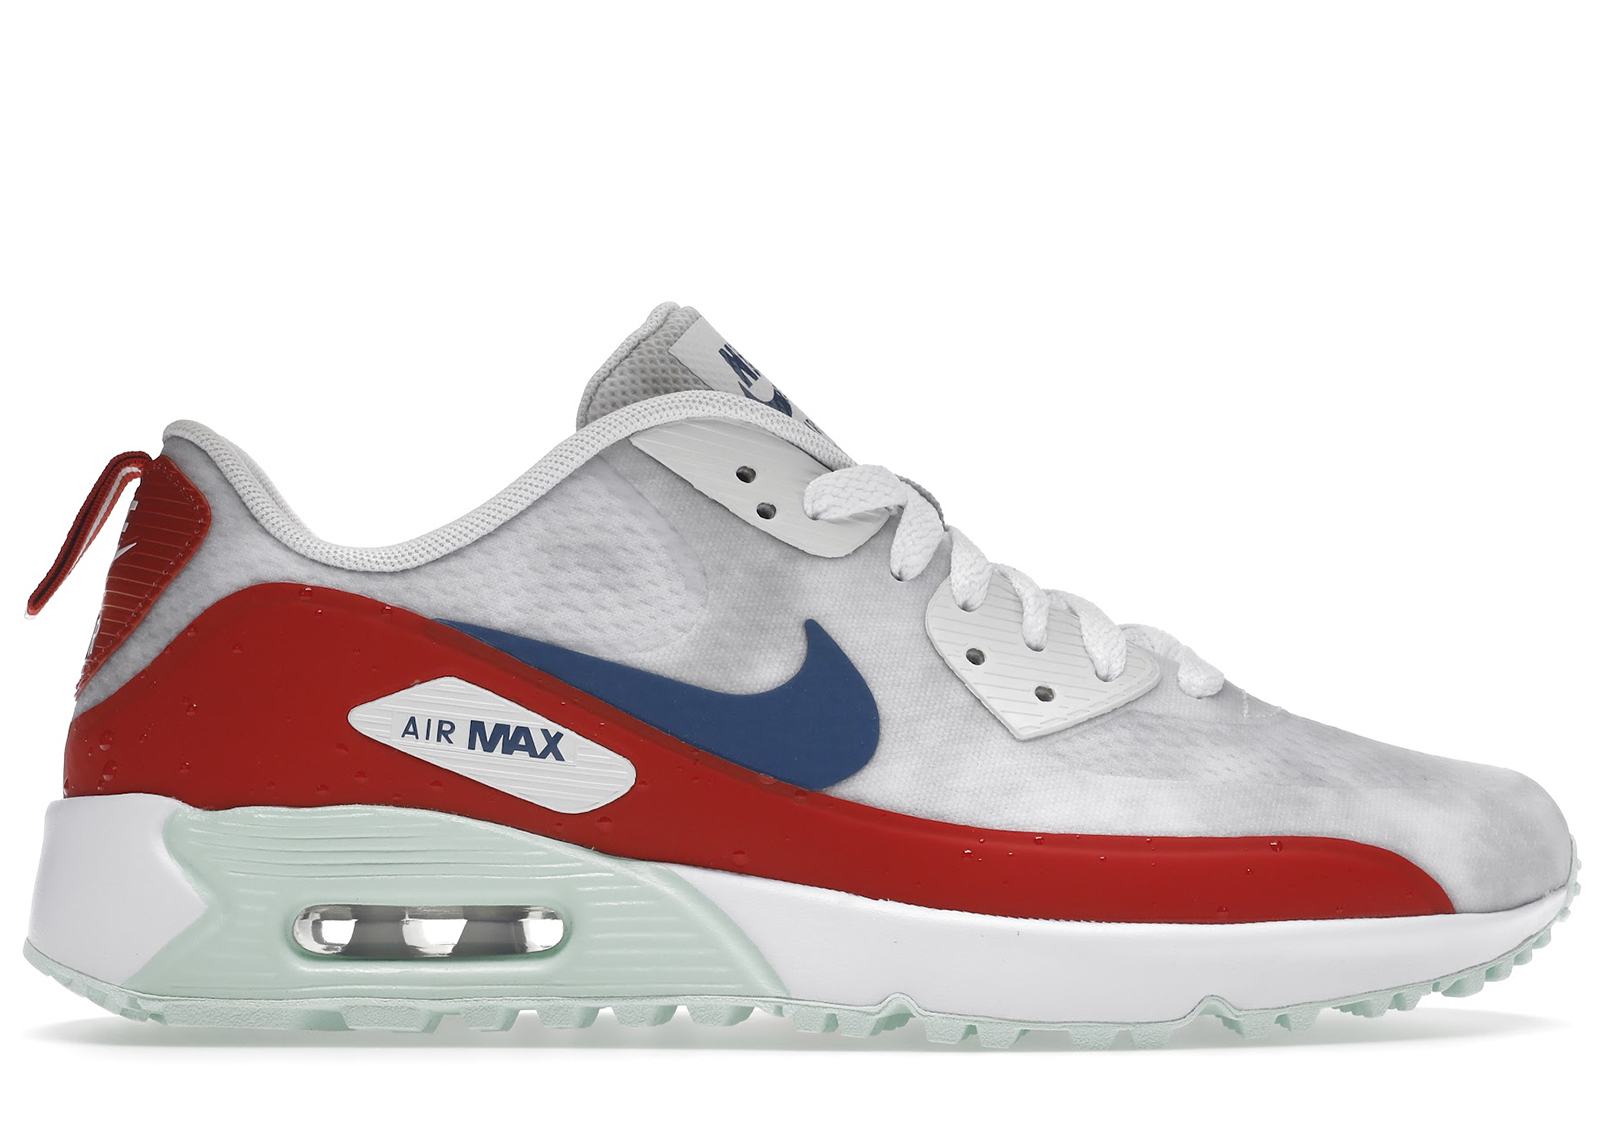 Nike Air Max 90 Golf U.S. Open Surf and Turf (2022) Men's - DM9009